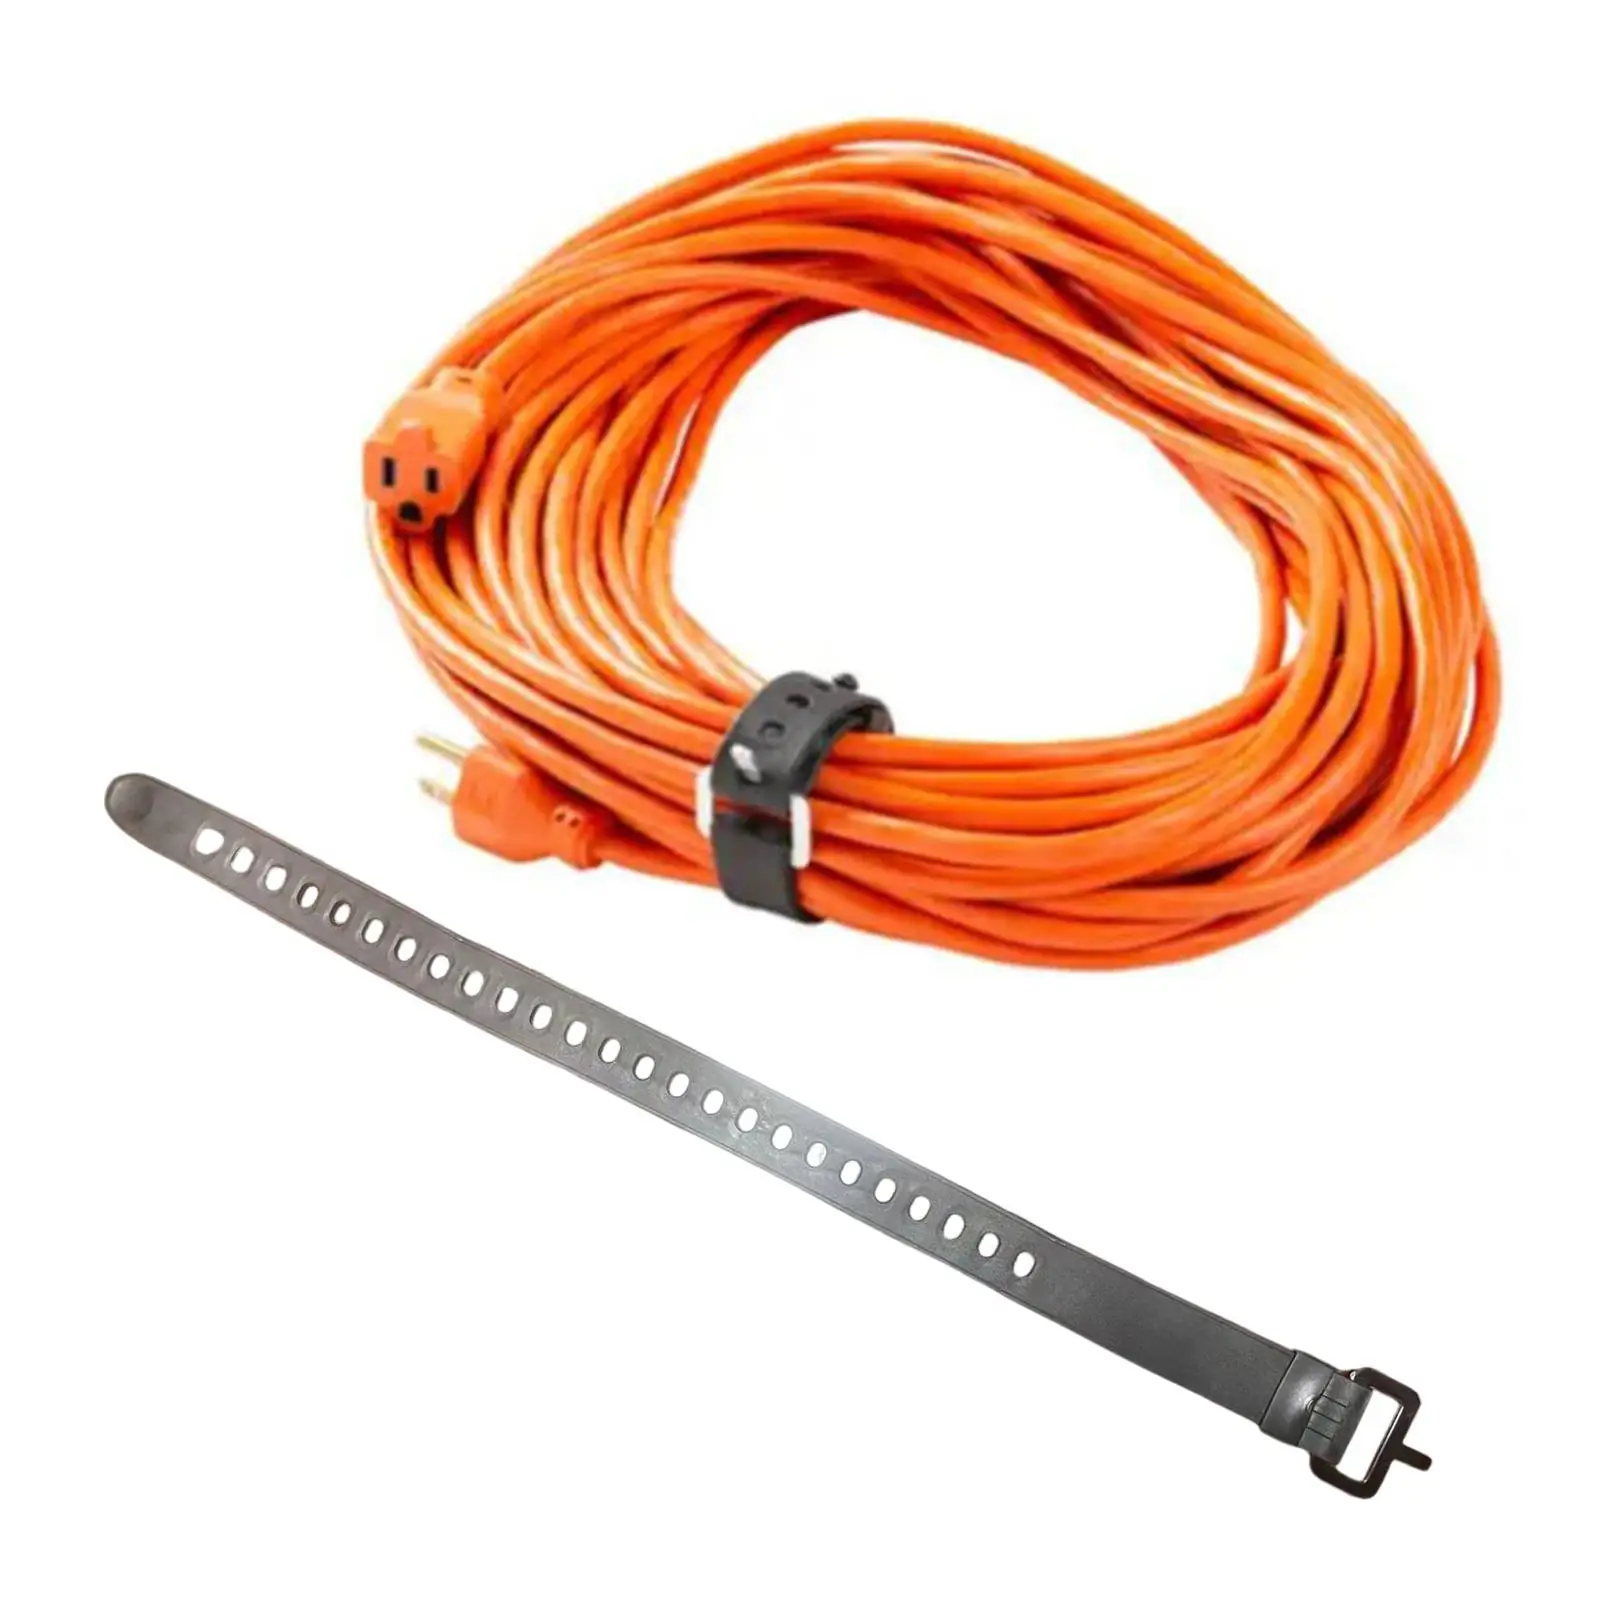 Storage Strap Portable Heavy Duty Multifunctional Tie Down Straps Extension Cord Storage for Rope Garage Hoses Workshop Tools